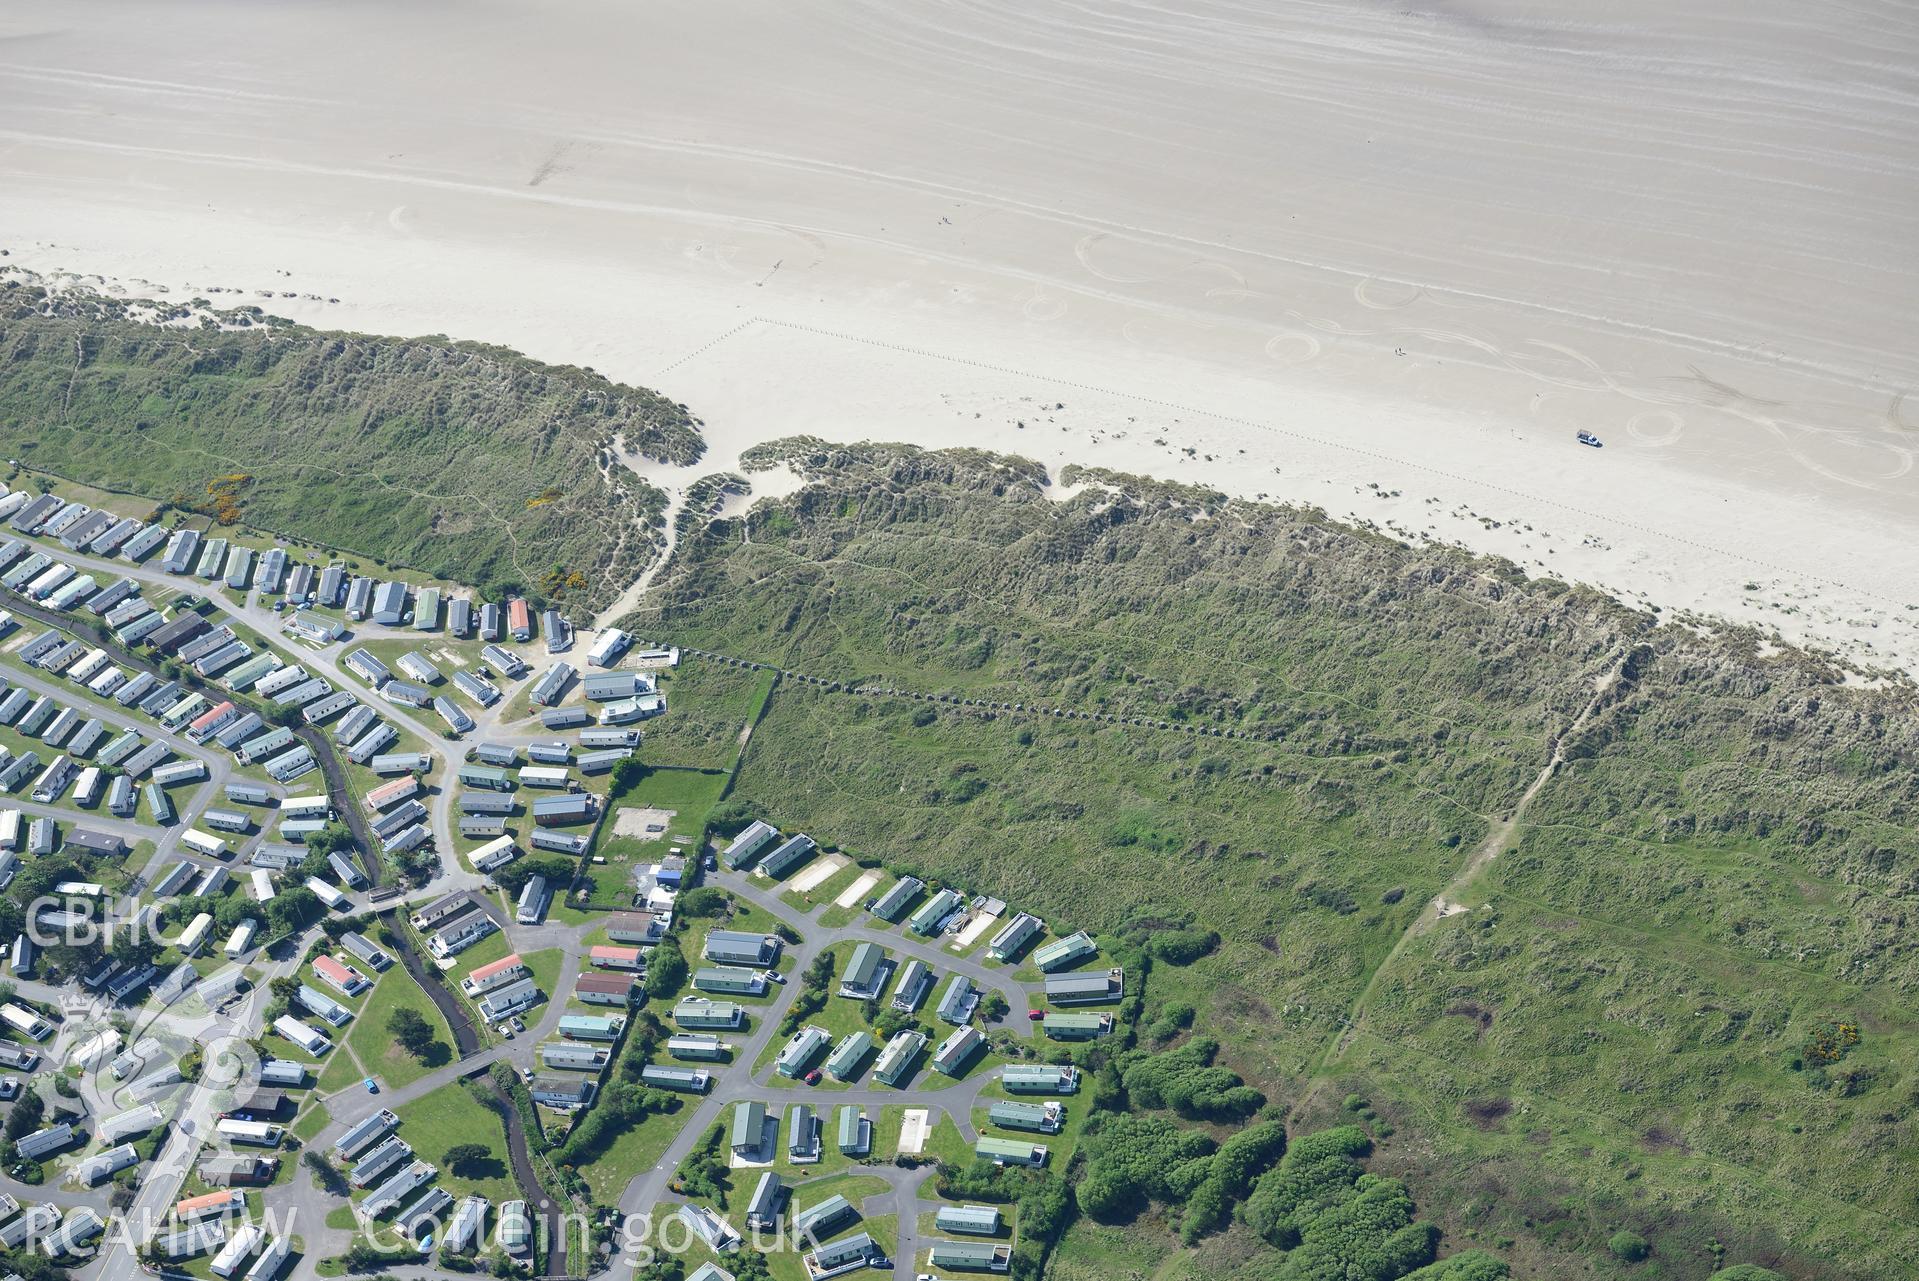 Aerial photography of Black Rock Sands taken on 3rd May 2017.  Baseline aerial reconnaissance survey for the CHERISH Project. ? Crown: CHERISH PROJECT 2017. Produced with EU funds through the Ireland Wales Co-operation Programme 2014-2020. All material made freely available through the Open Government Licence.